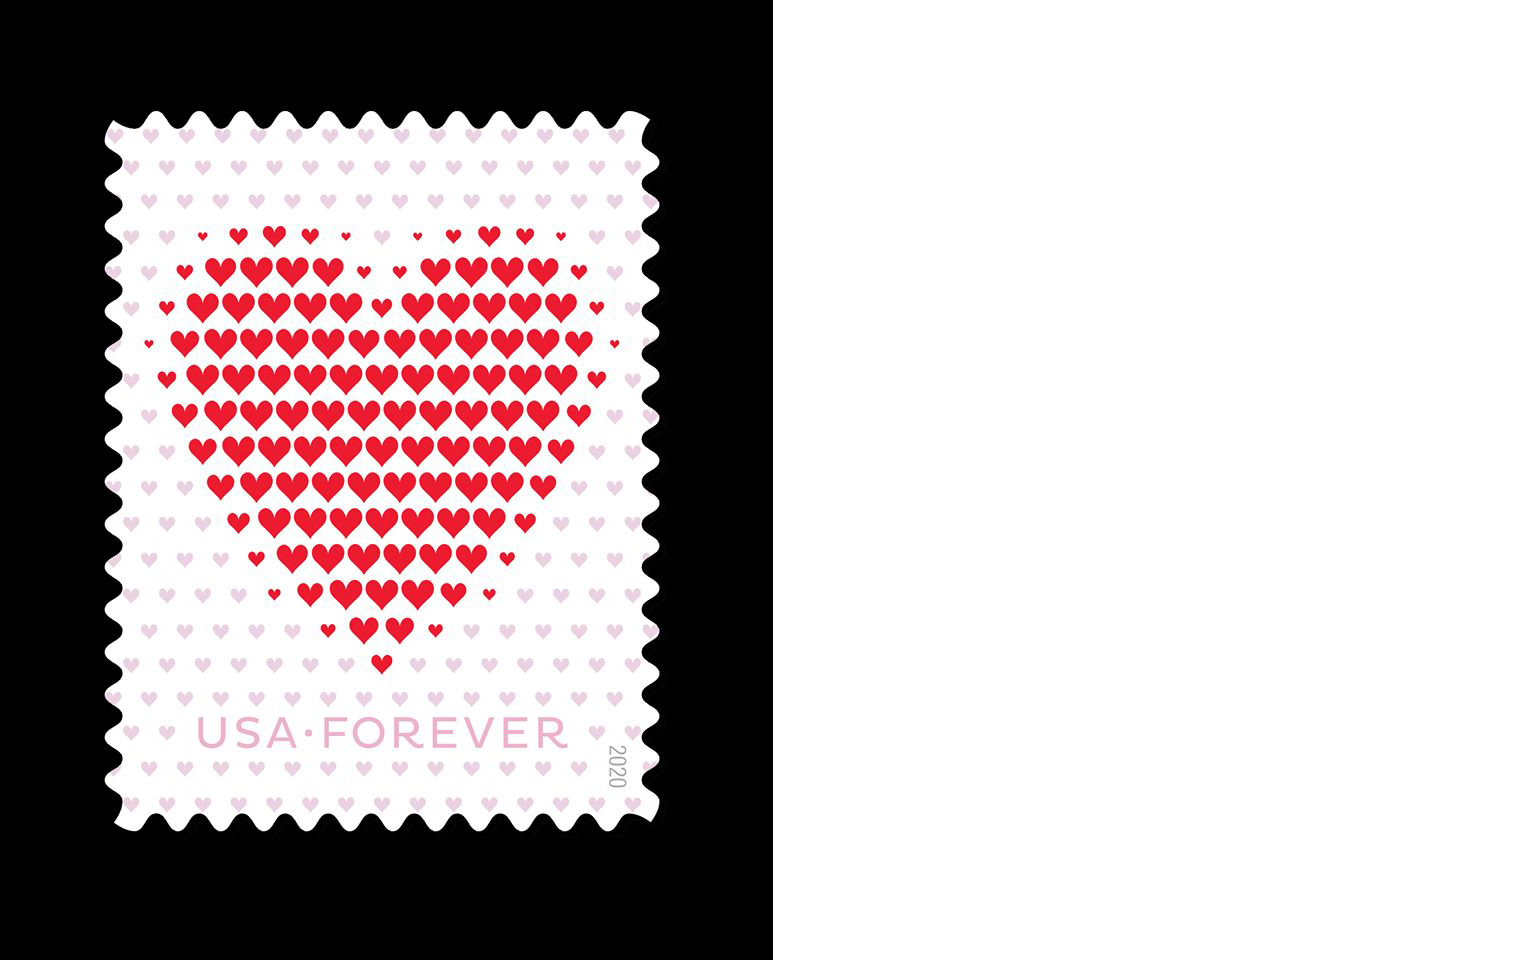 Made of Hearts Stamp